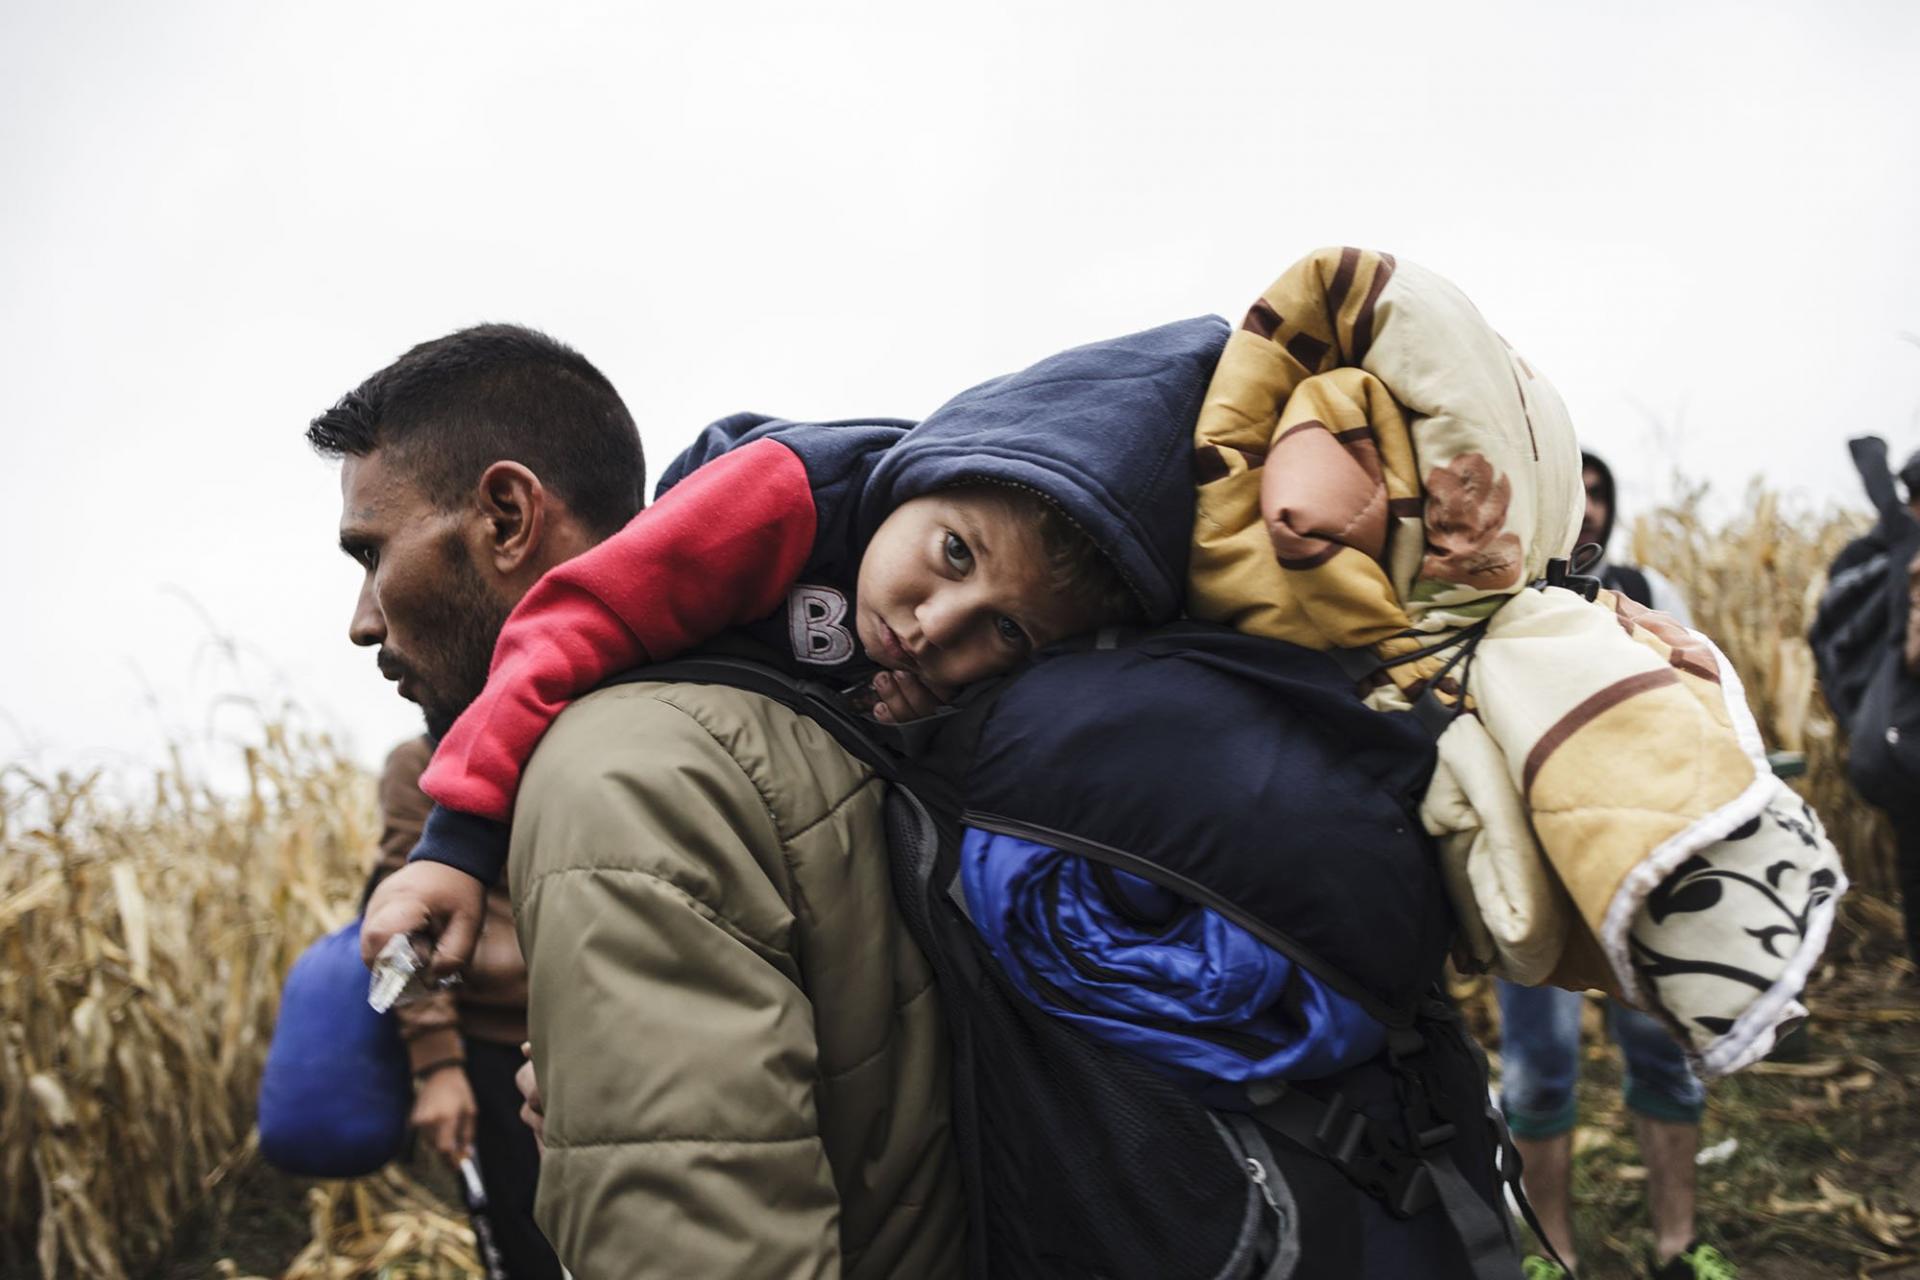 Refugee Crisis In Europe The Determination Of The Refugees To Reach Their Destination Is